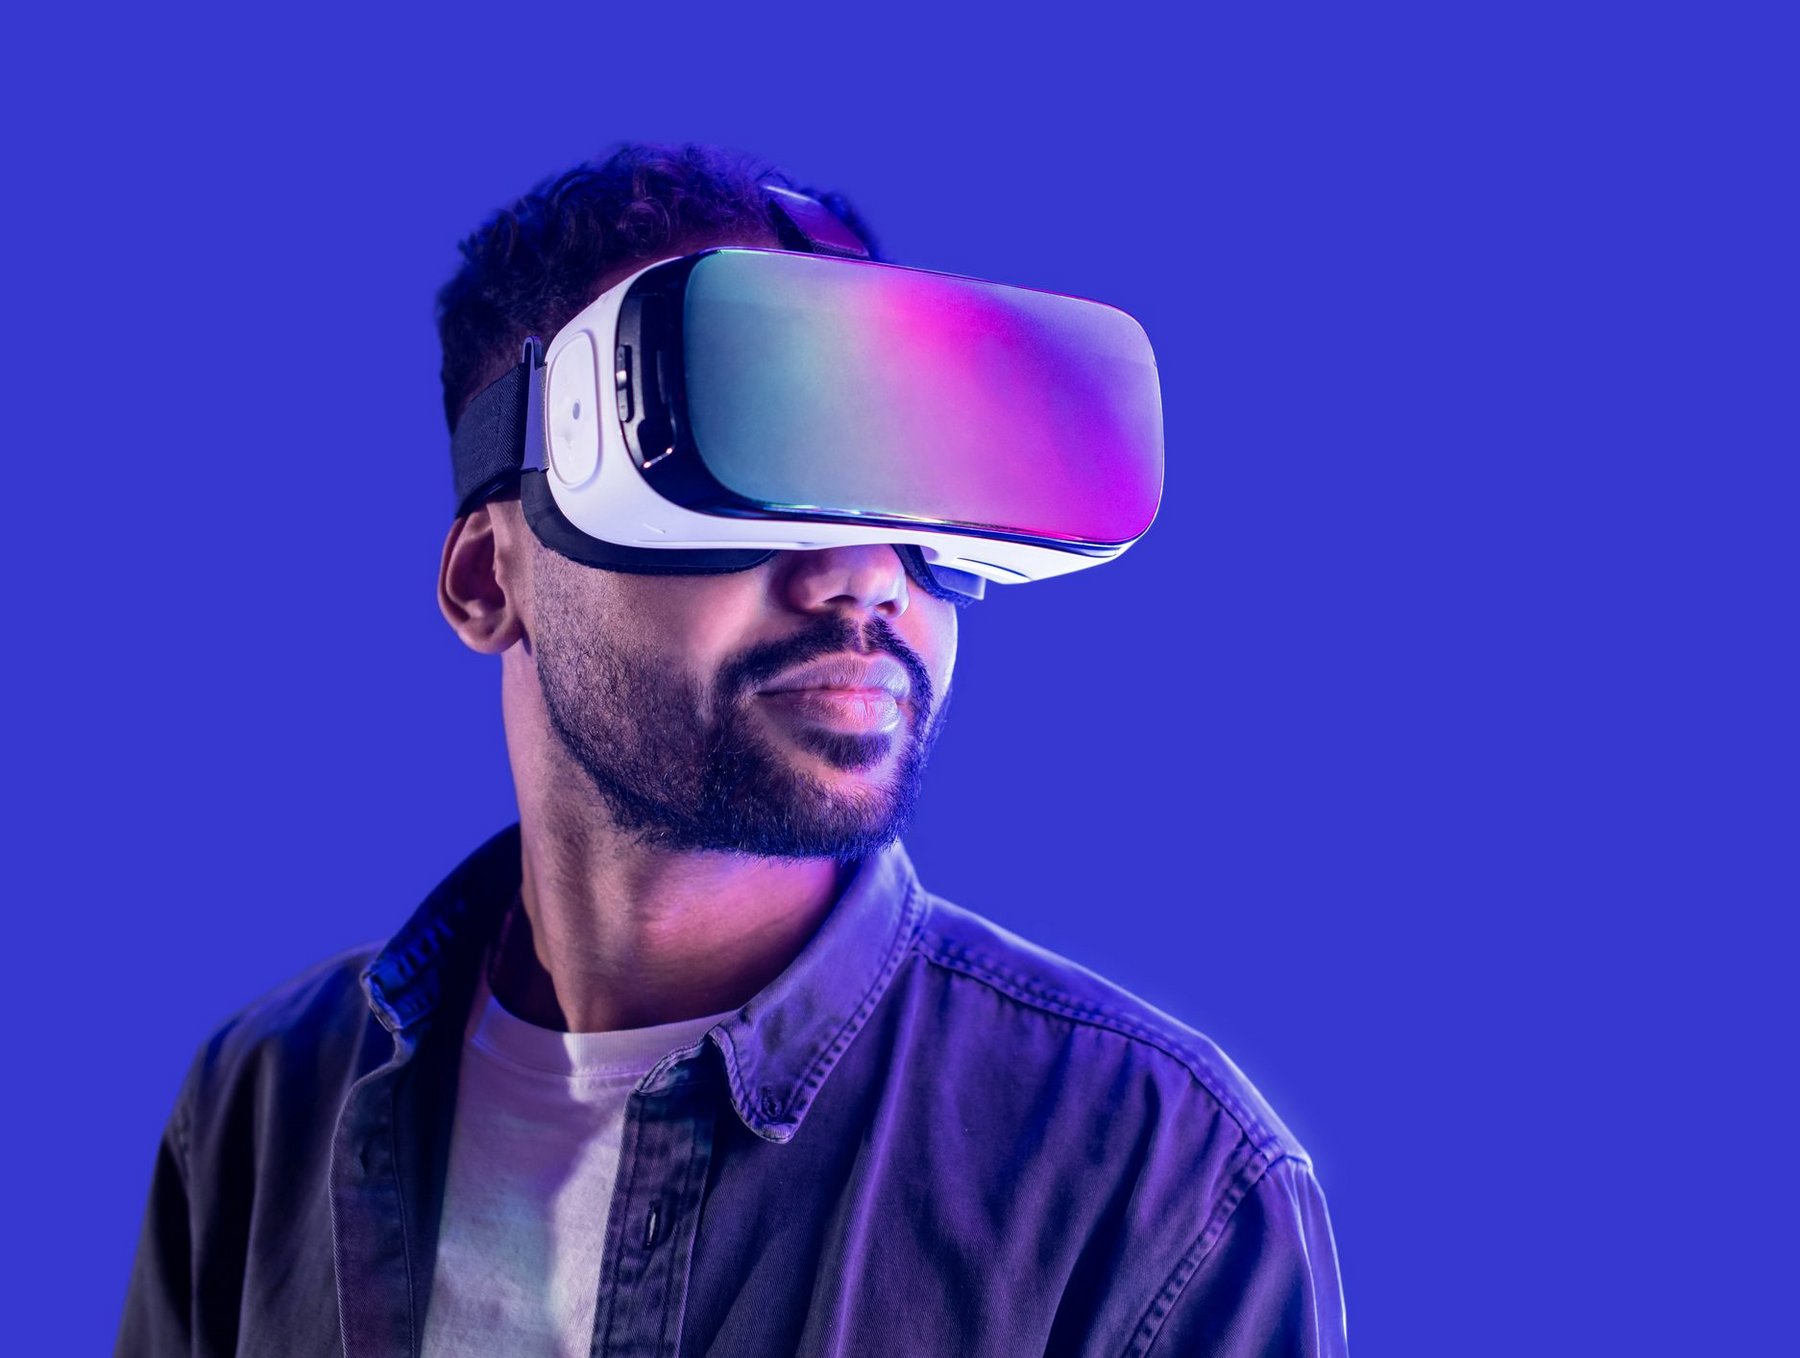 Meta unveils Quest 3 mixed reality headset ahead of Apple's VR